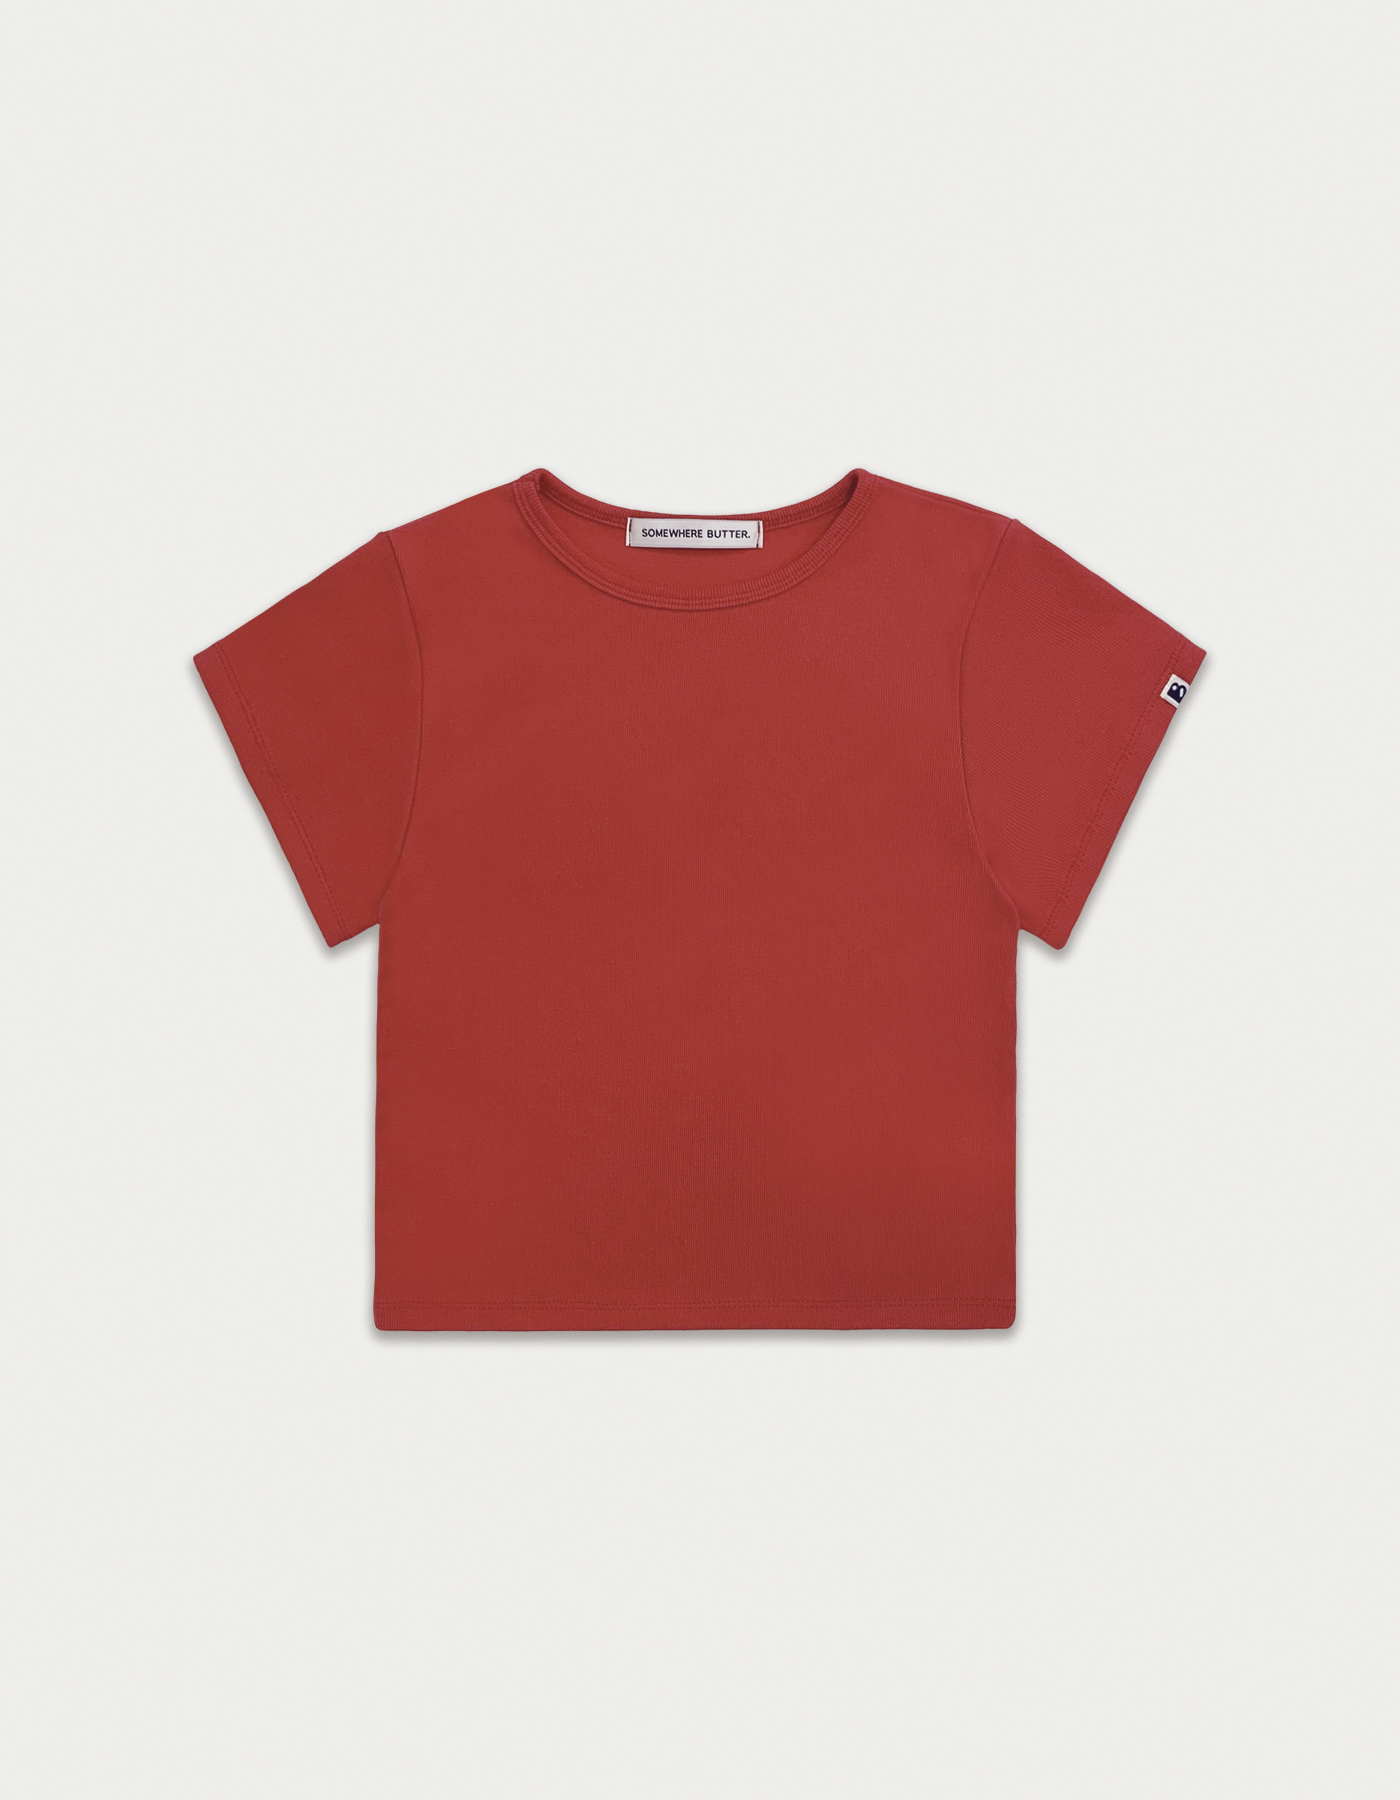 [3rd Order 5.30 출고] Essential clean top - red